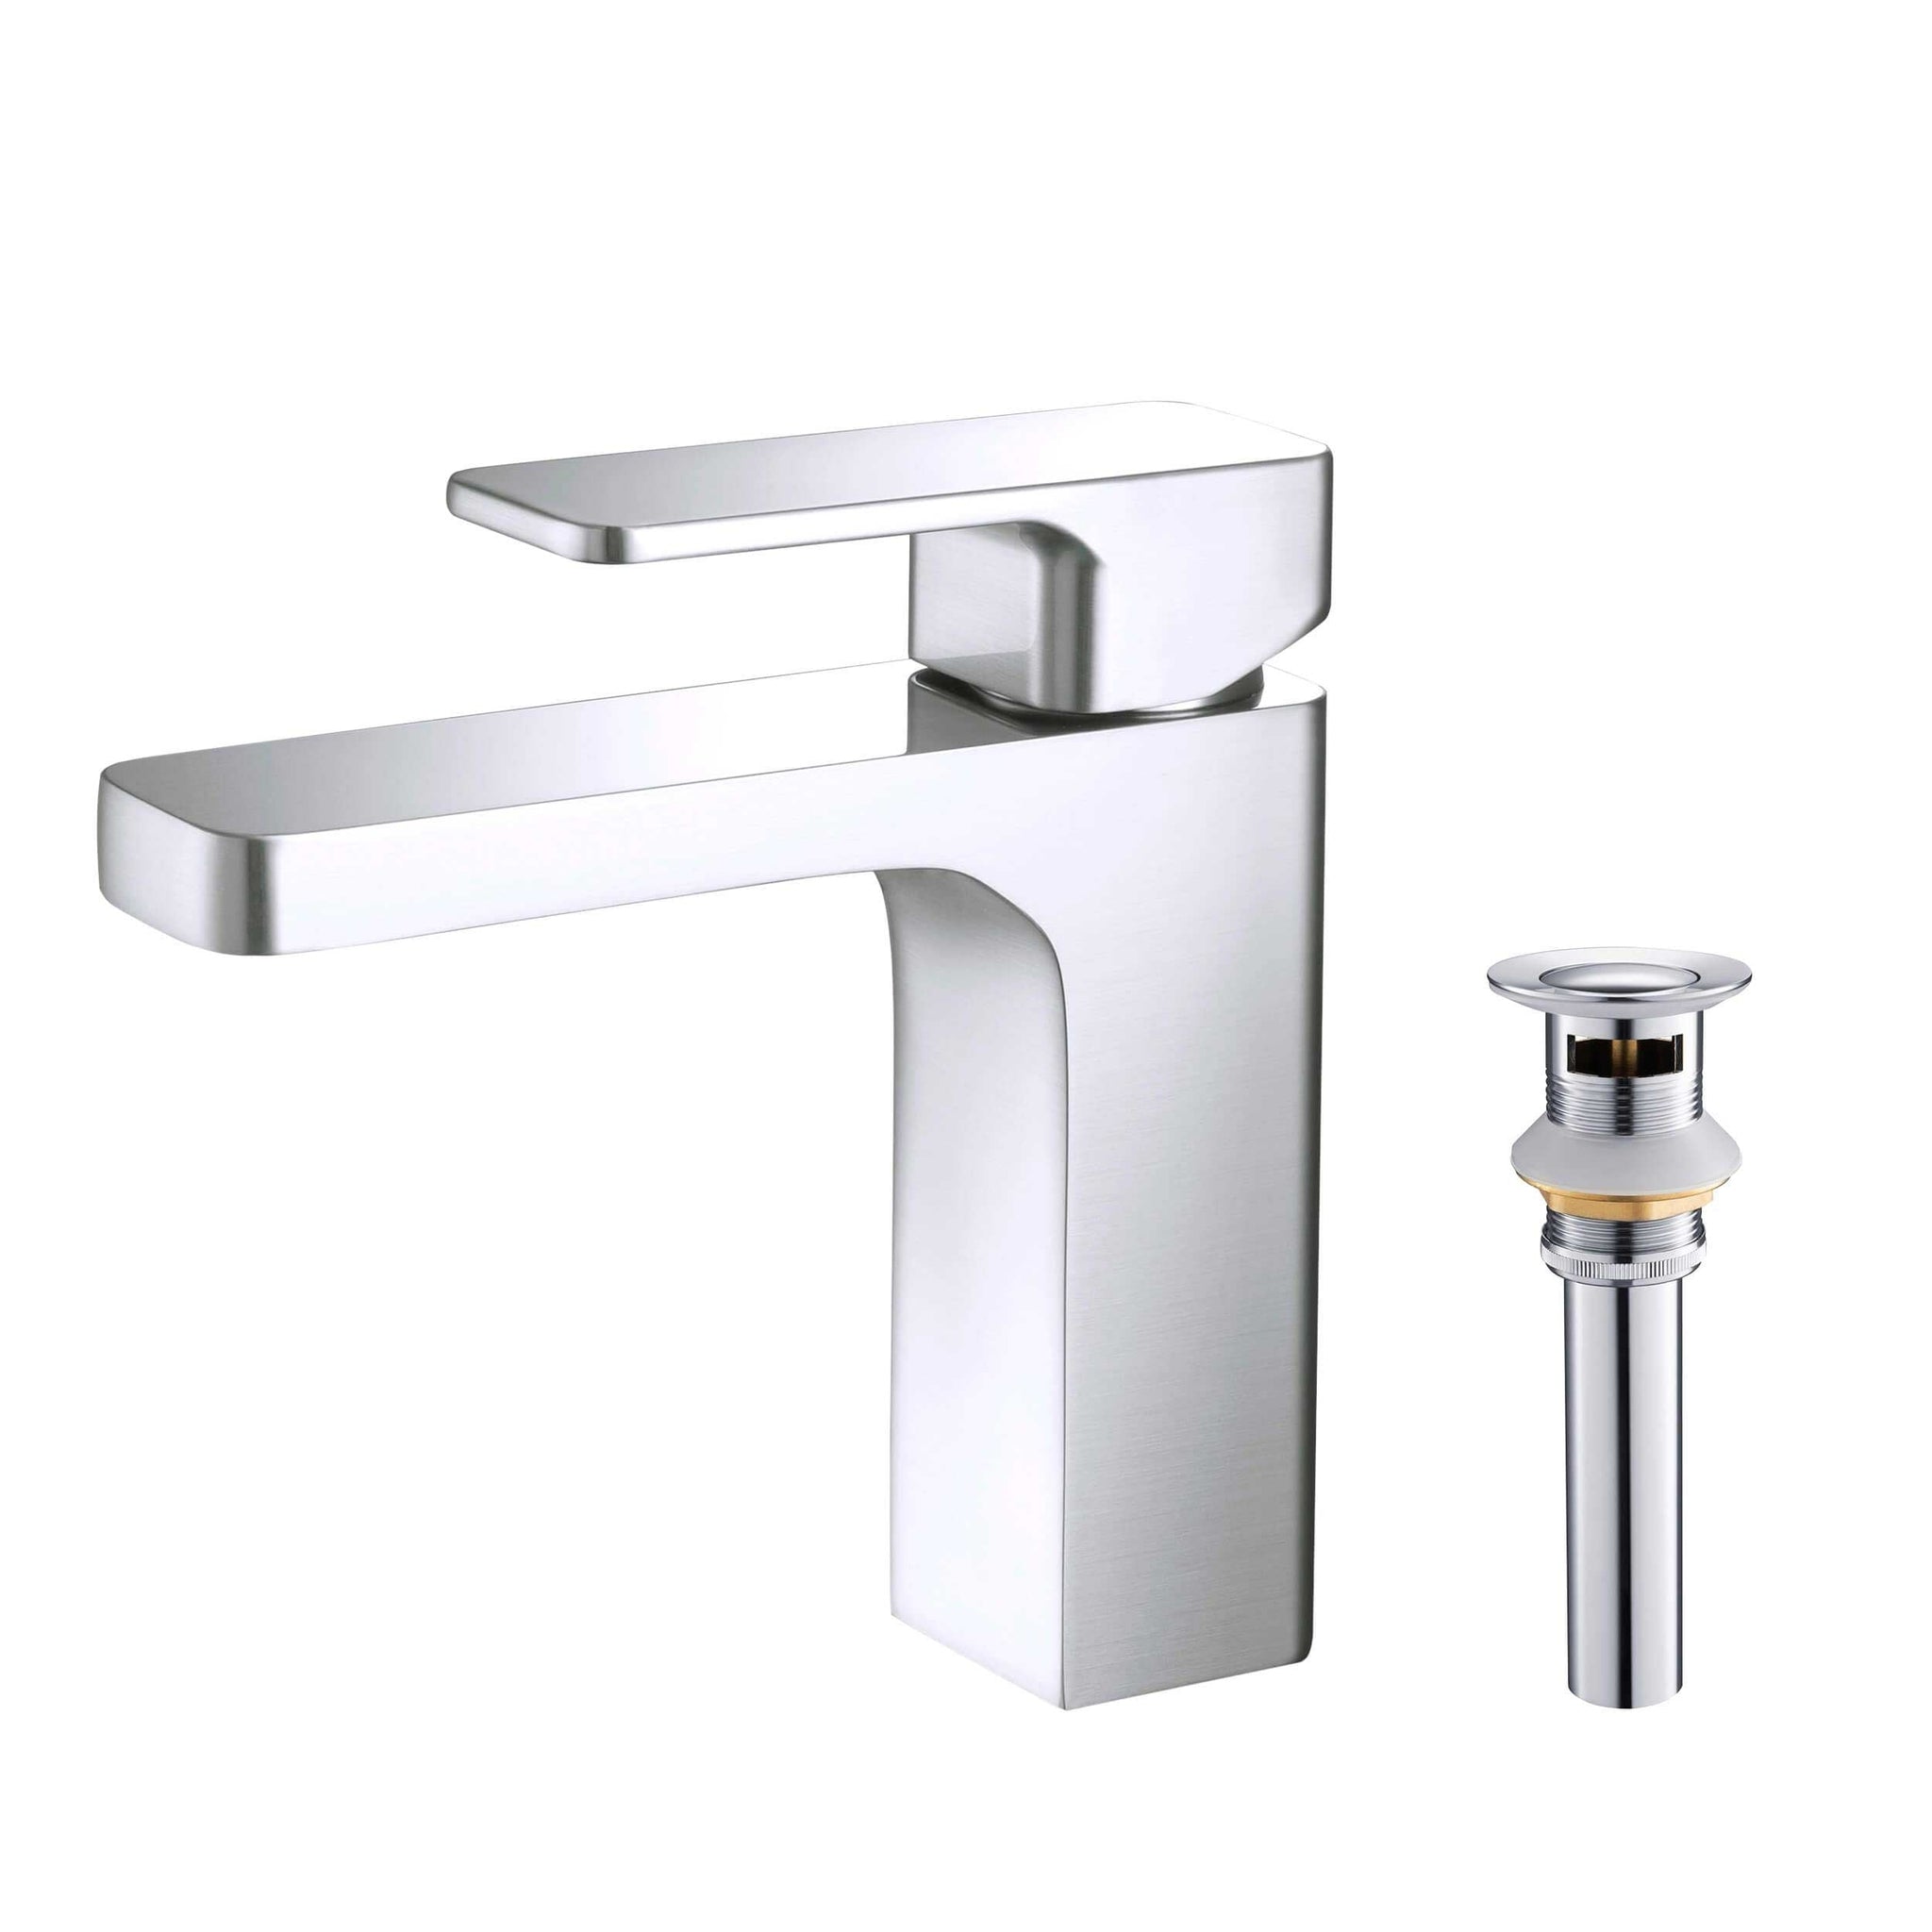 KIBI, KIBI Blaze Single Handle Chrome Solid Brass Bathroom Sink Faucet With Pop-Up Drain Stopper Small Cover With Overflow